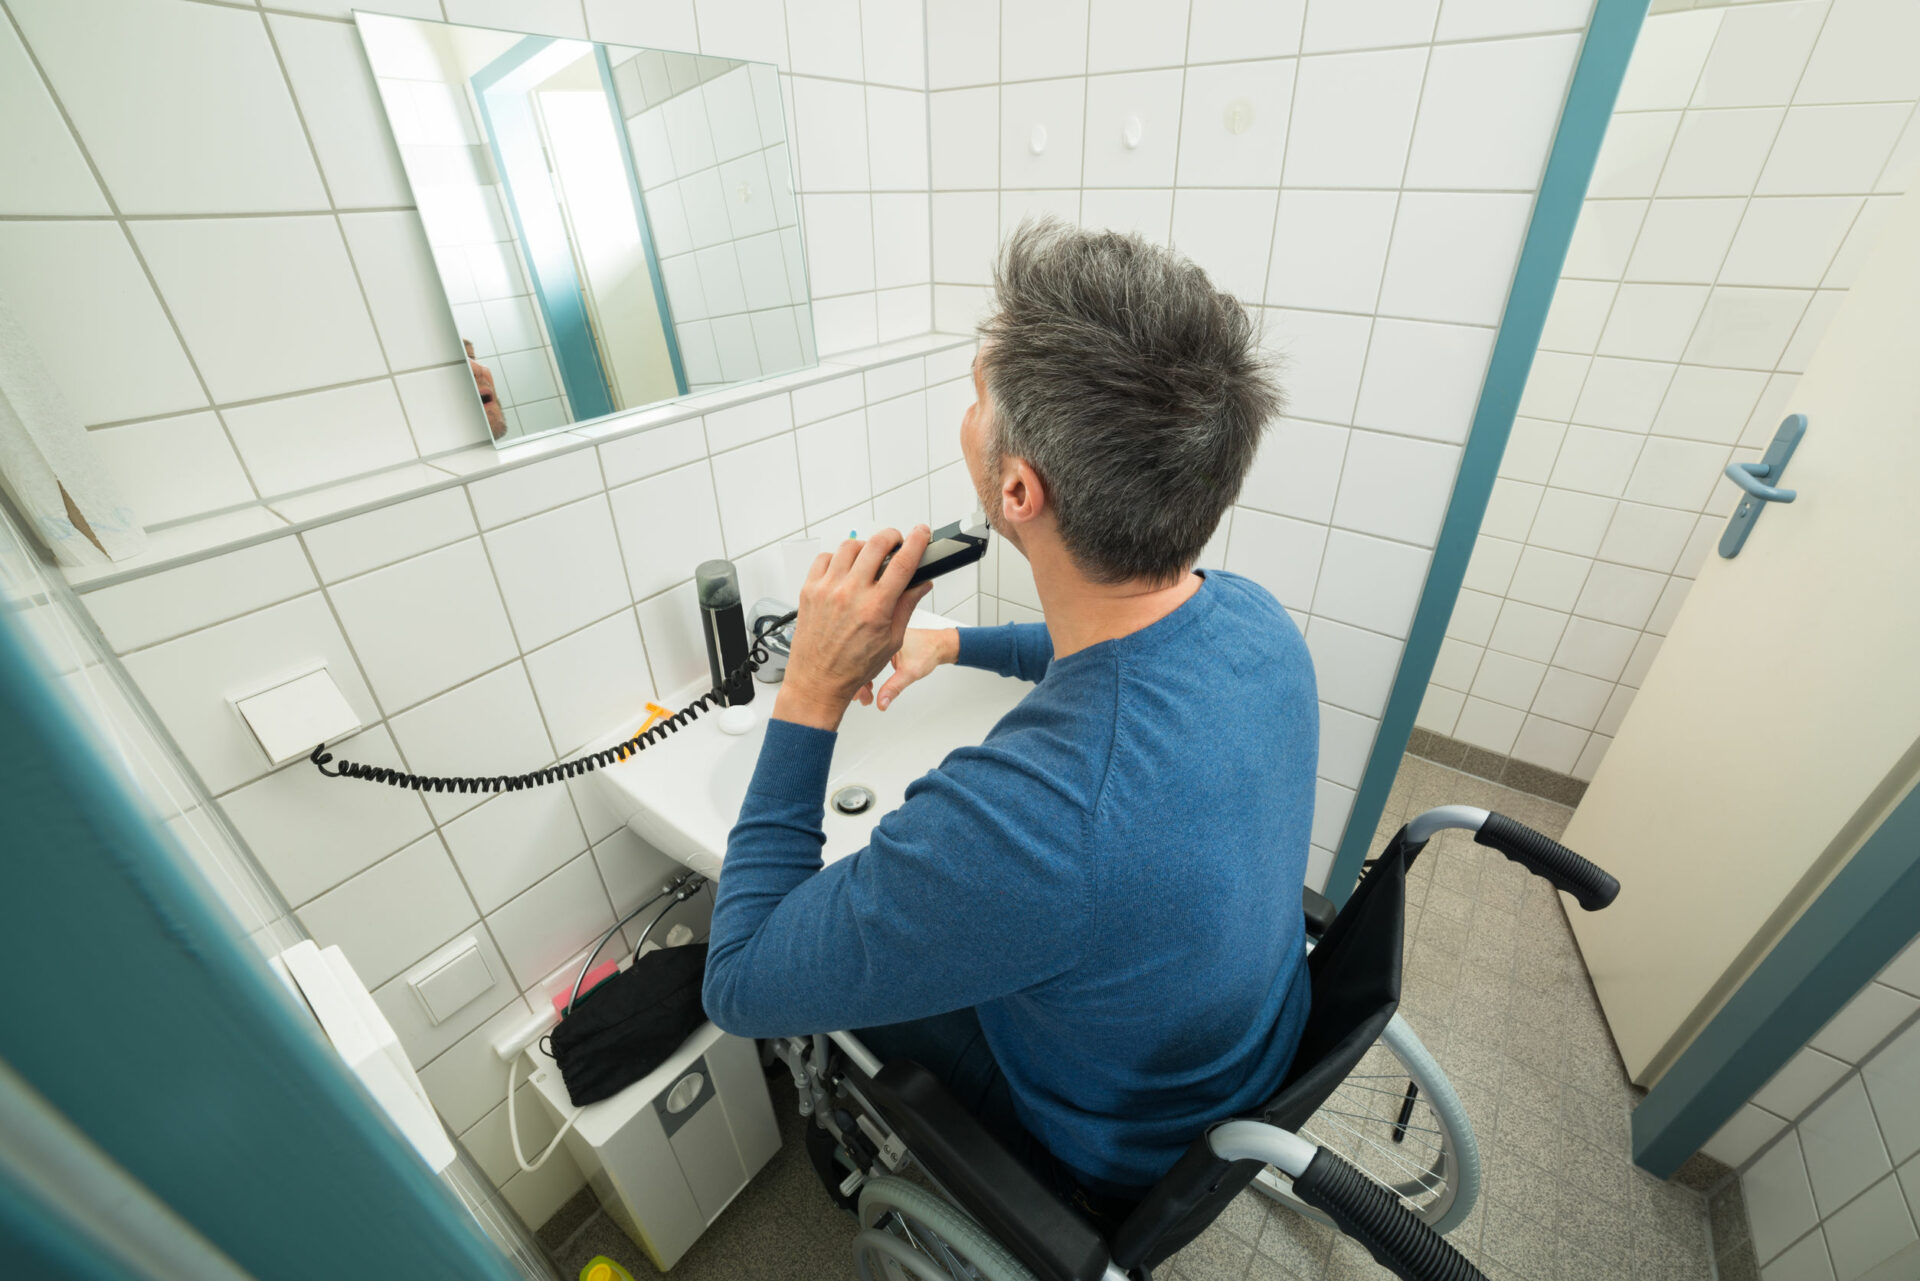 Simplifying Bathrooms for People with Disabilities